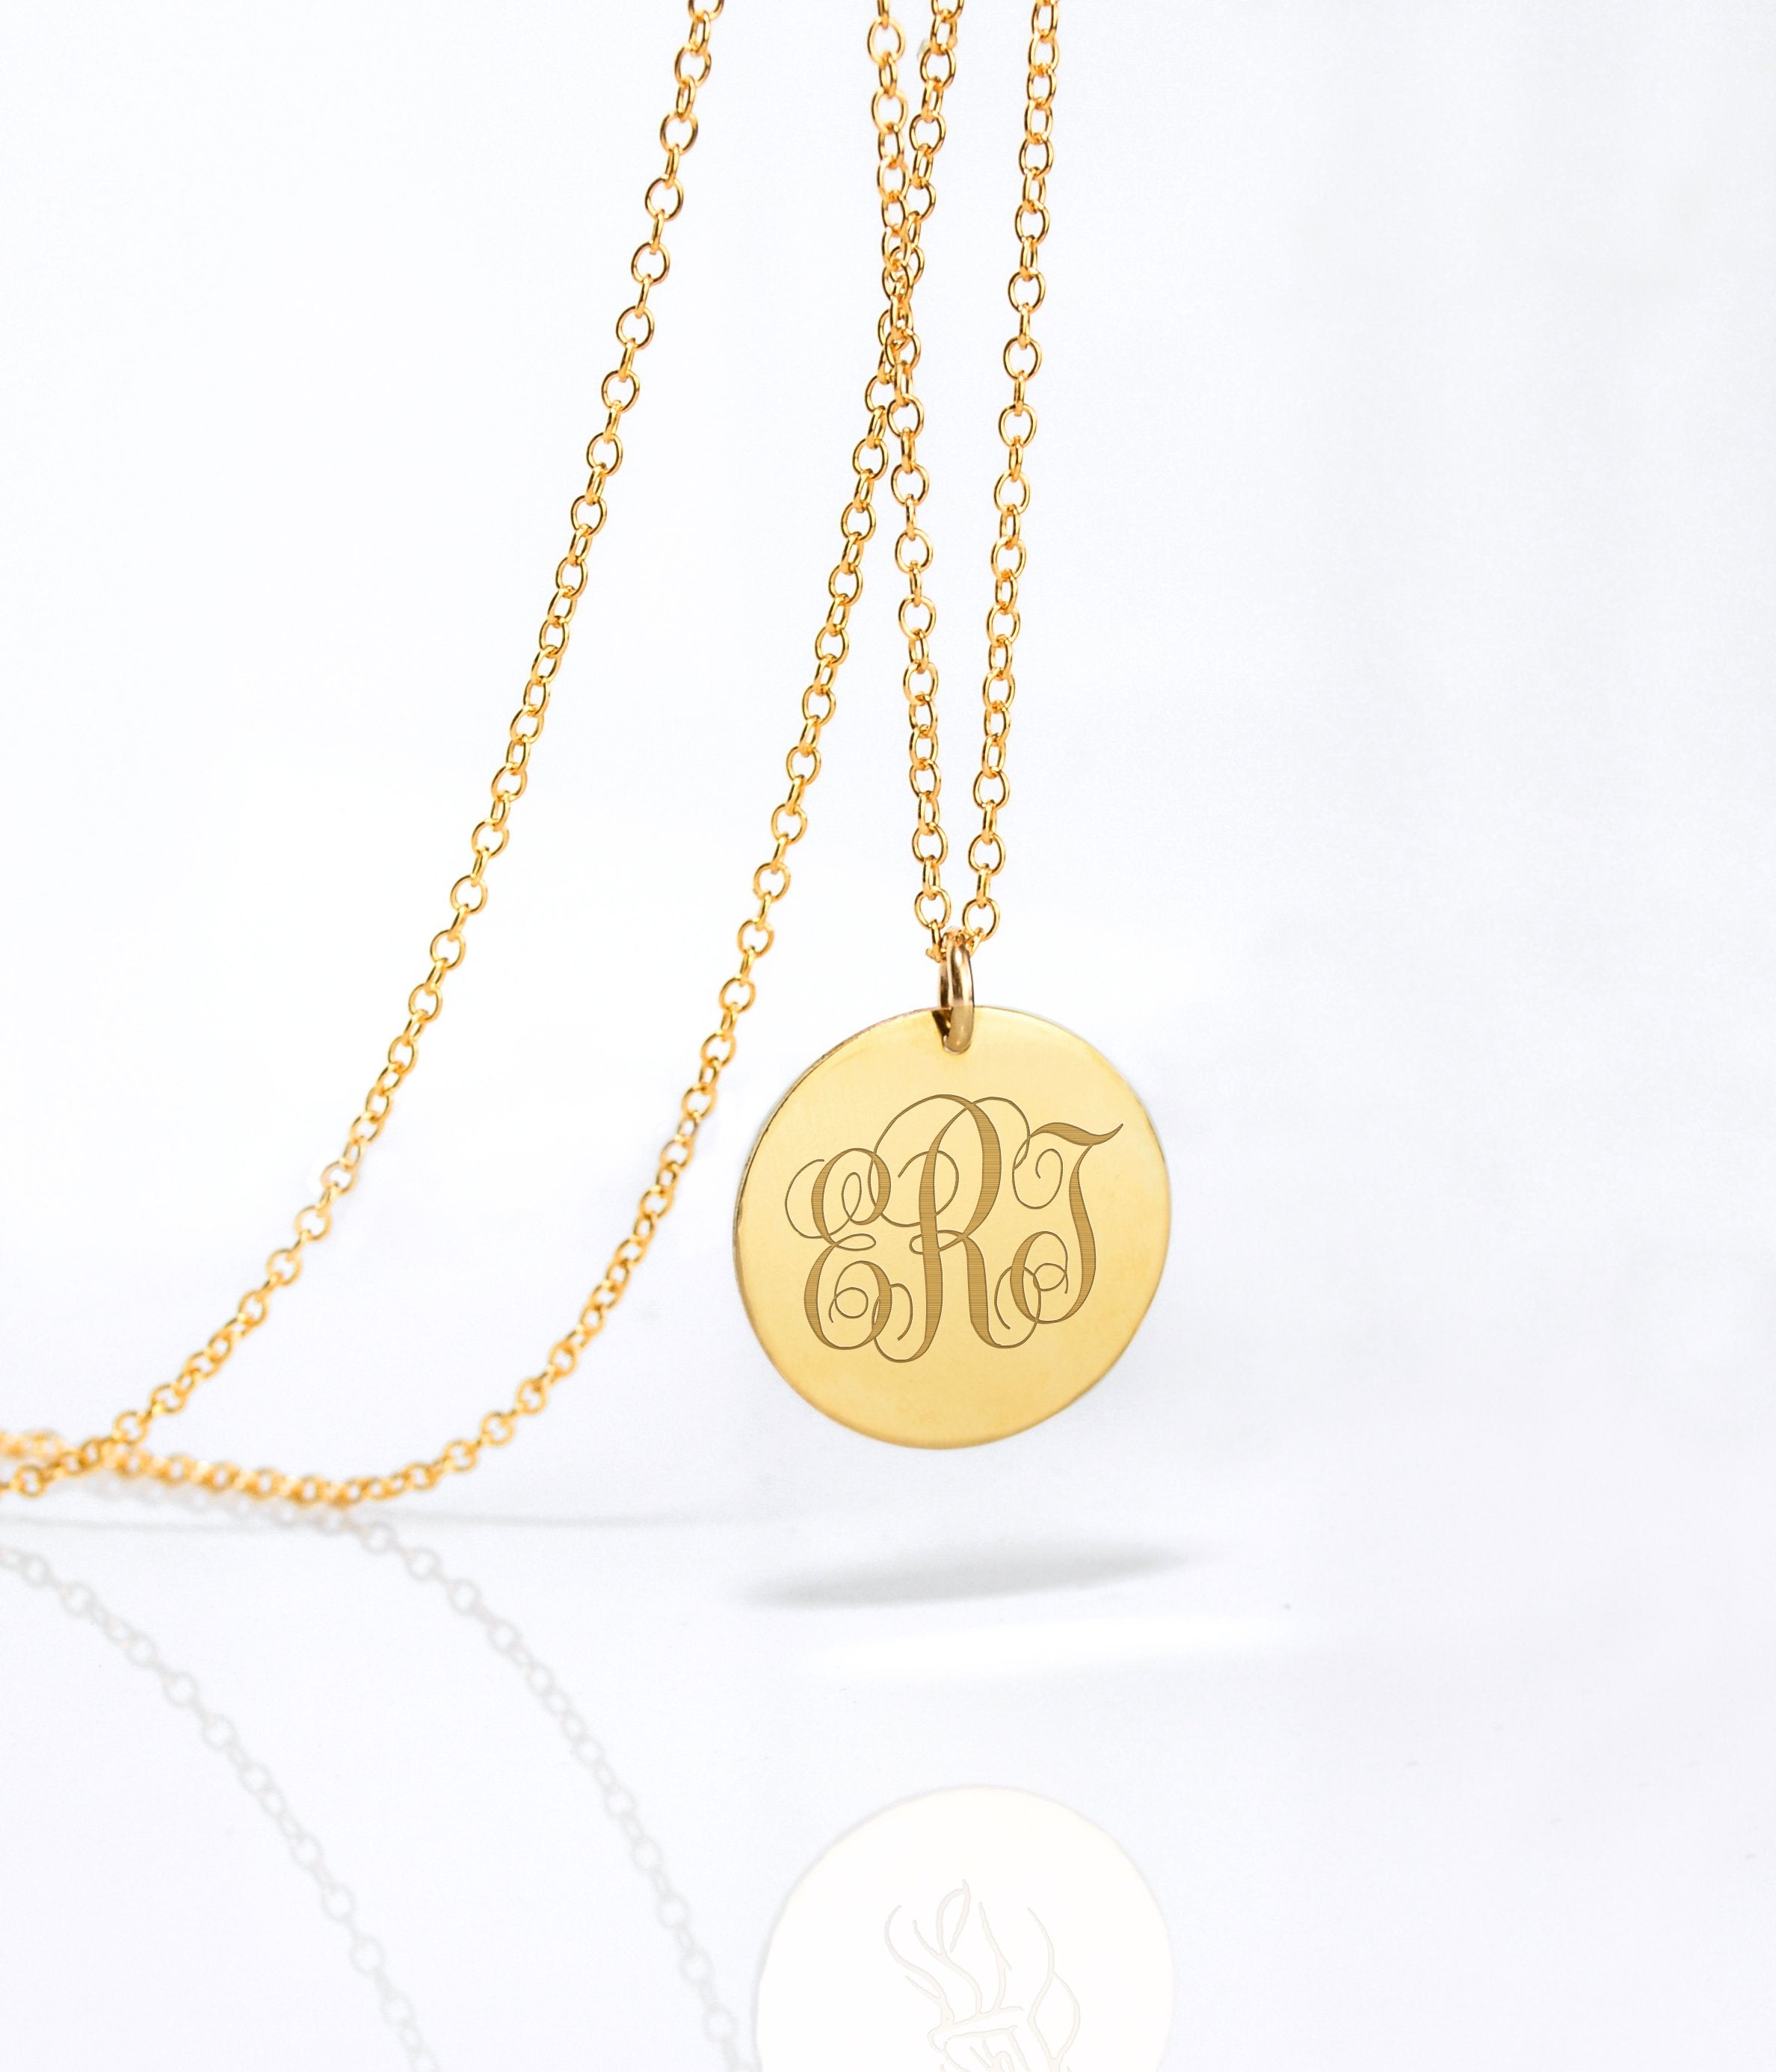 Personalized Monogram Pendant Necklace - Engraved Silver Pendant Gift 18 inch (45 cm)